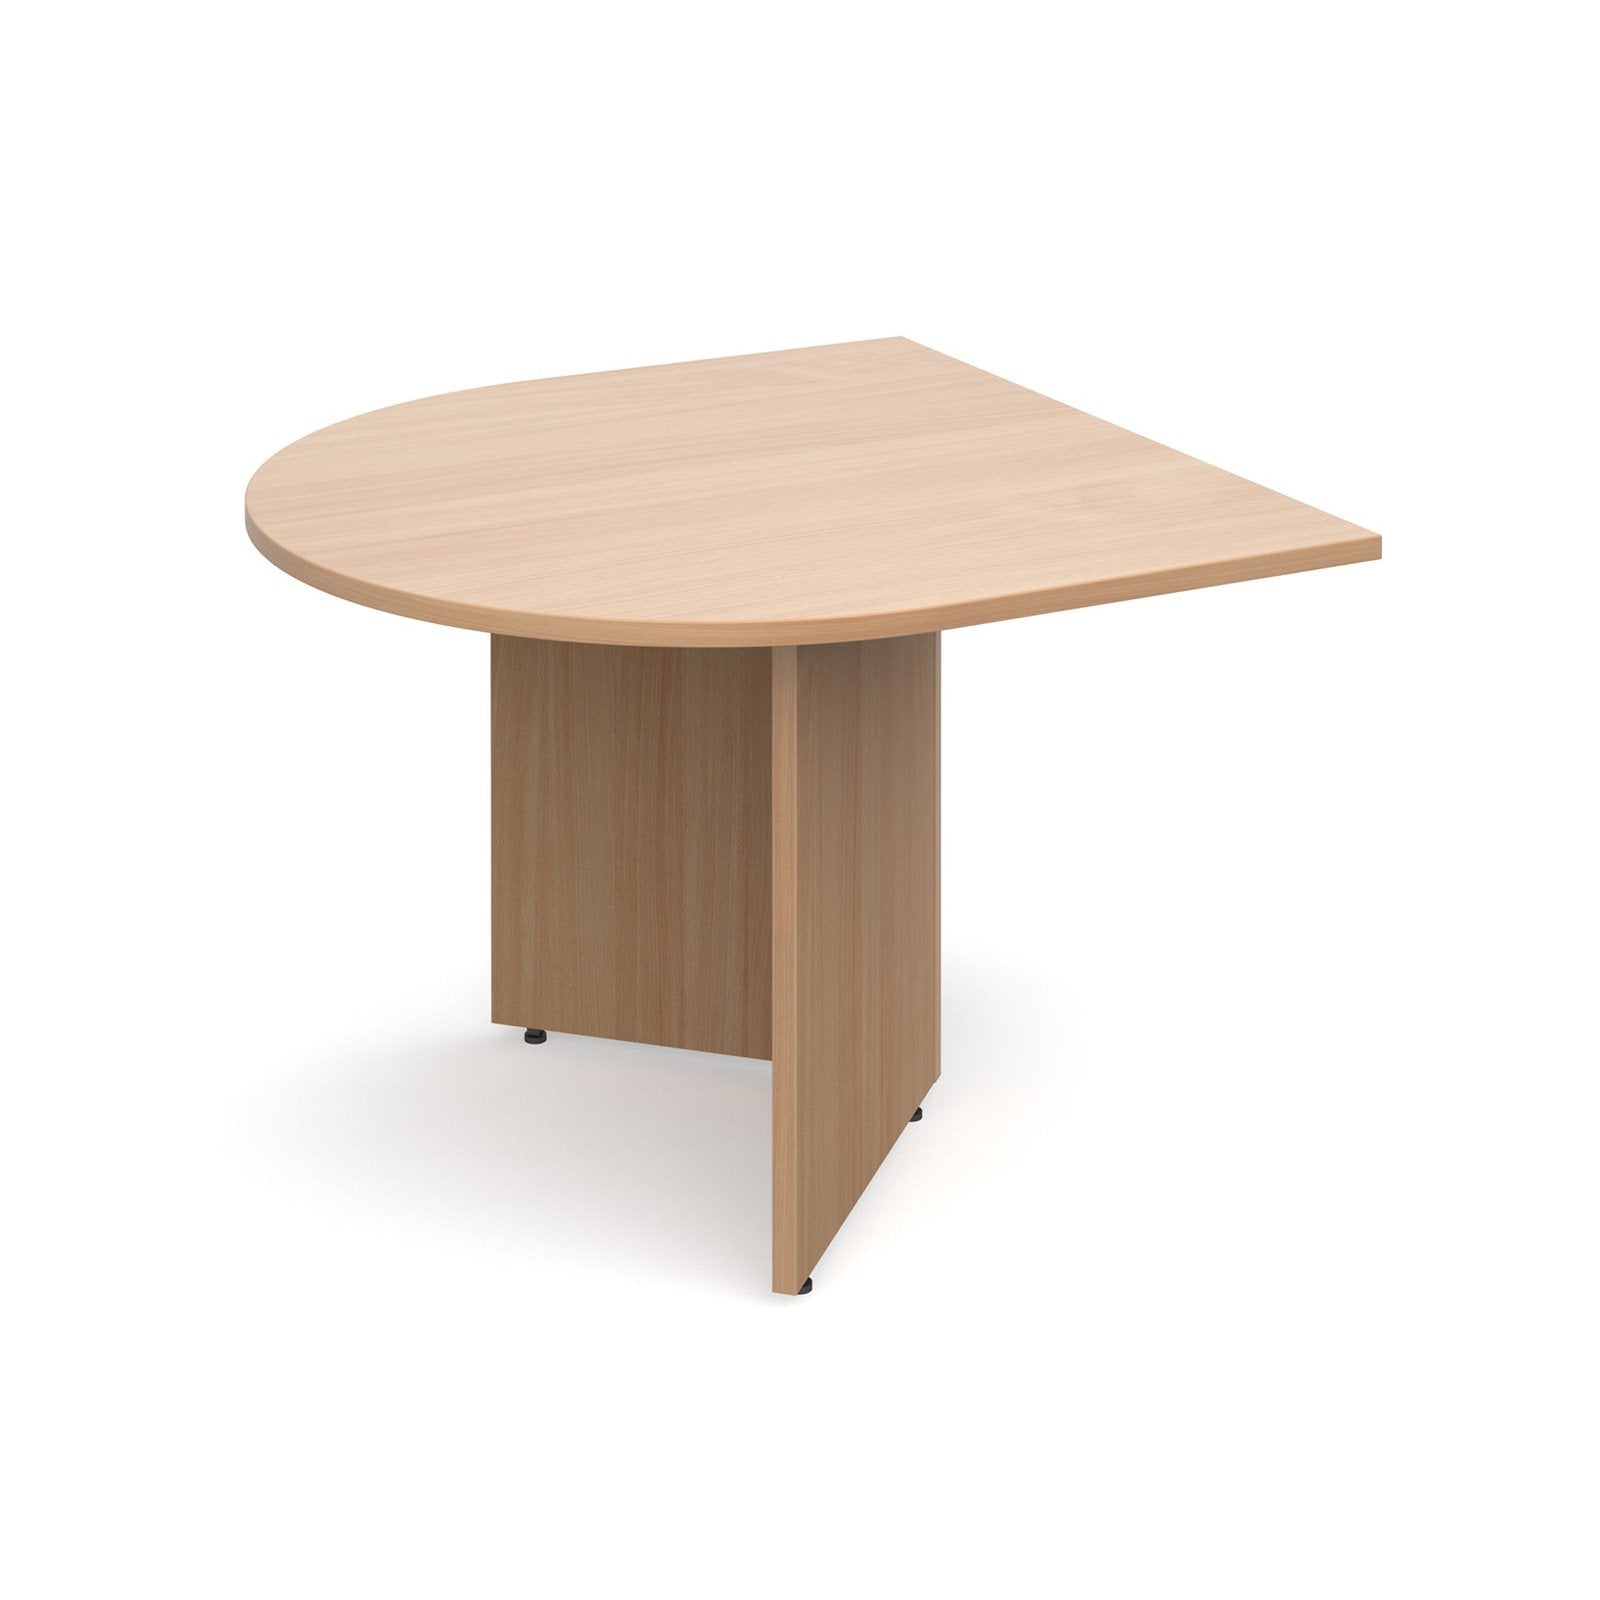 Arrow head leg radial extension table - Office Products Online